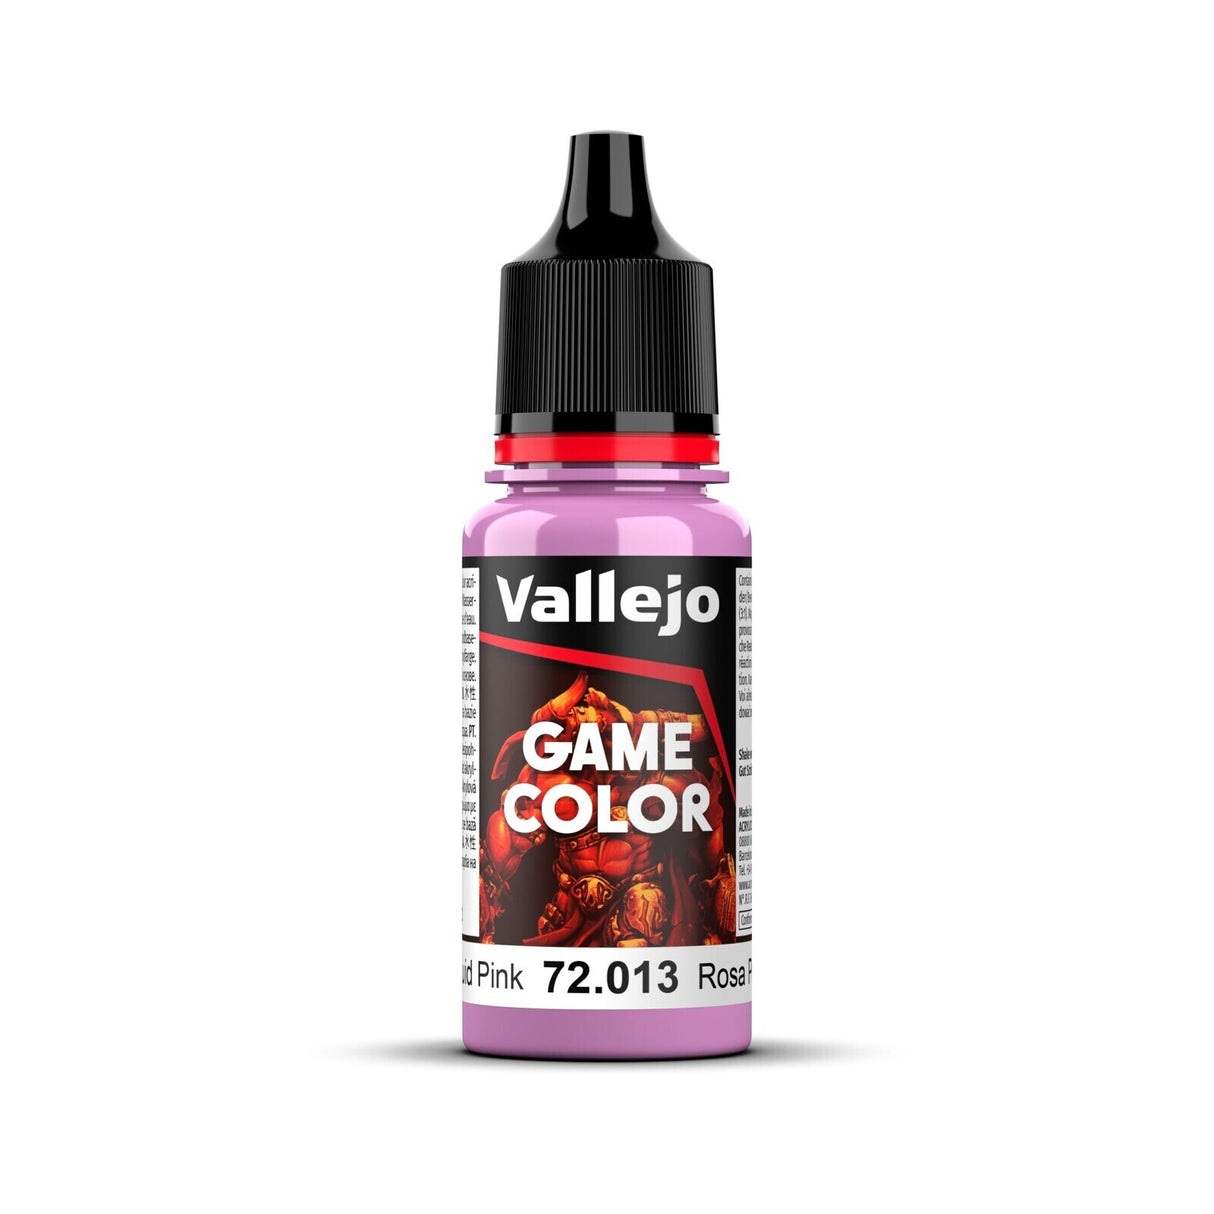 Vallejo Game Color Squid Pink 18ml Acrylic Paint - Hobbytech Toys